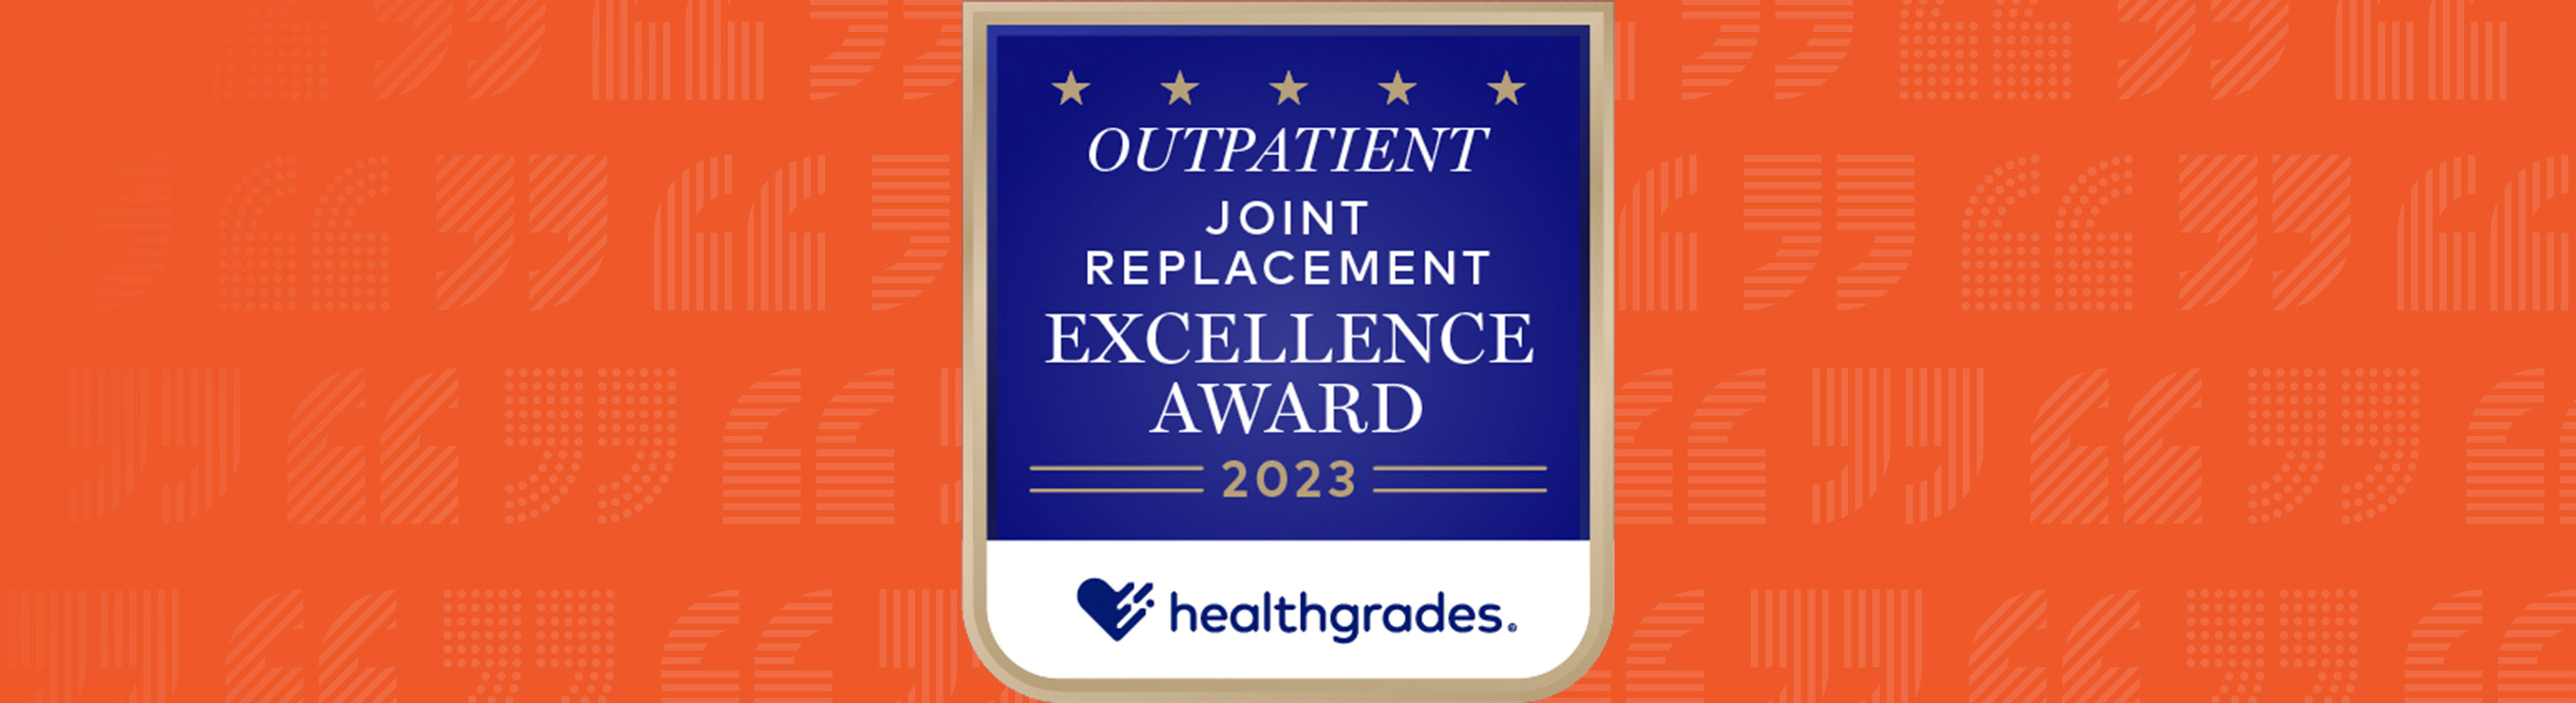 Hartford Hospital Recognized Nationally for Outstanding Clinical Outcomes in Outpatient Joint Replacement